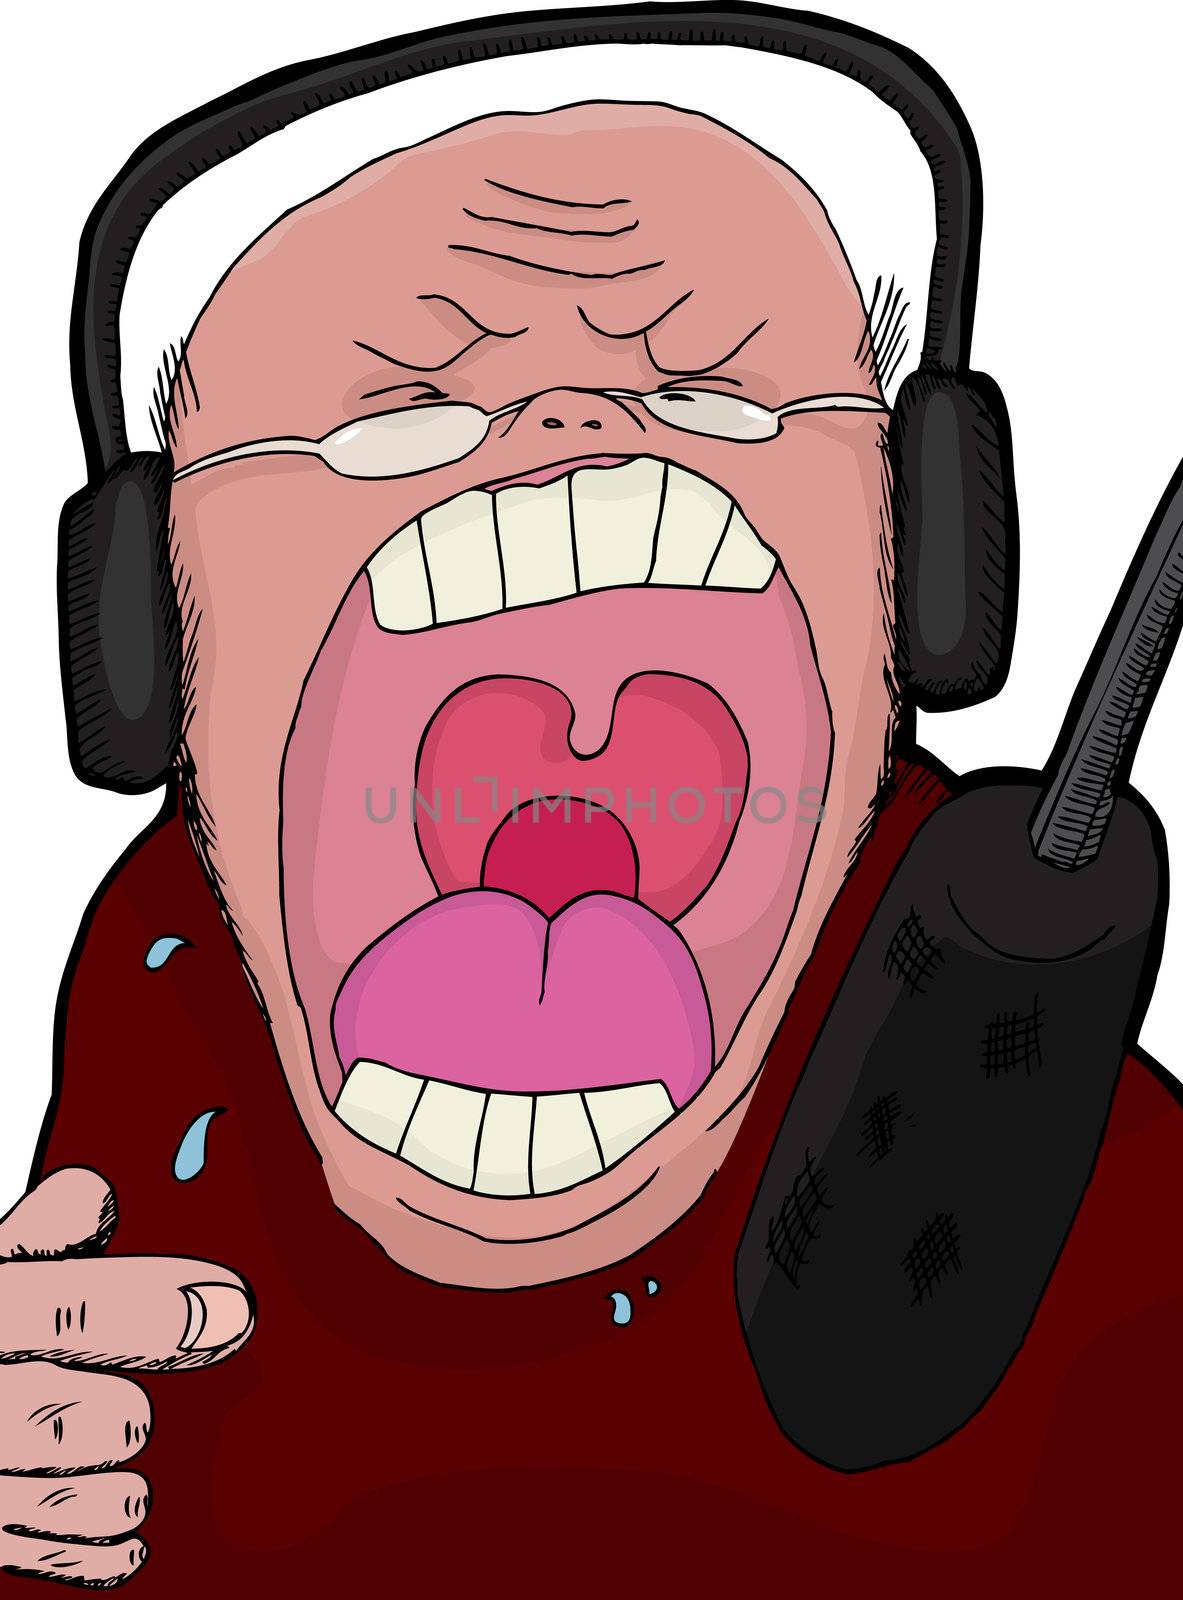 Angry talk show host screaming into a microphone